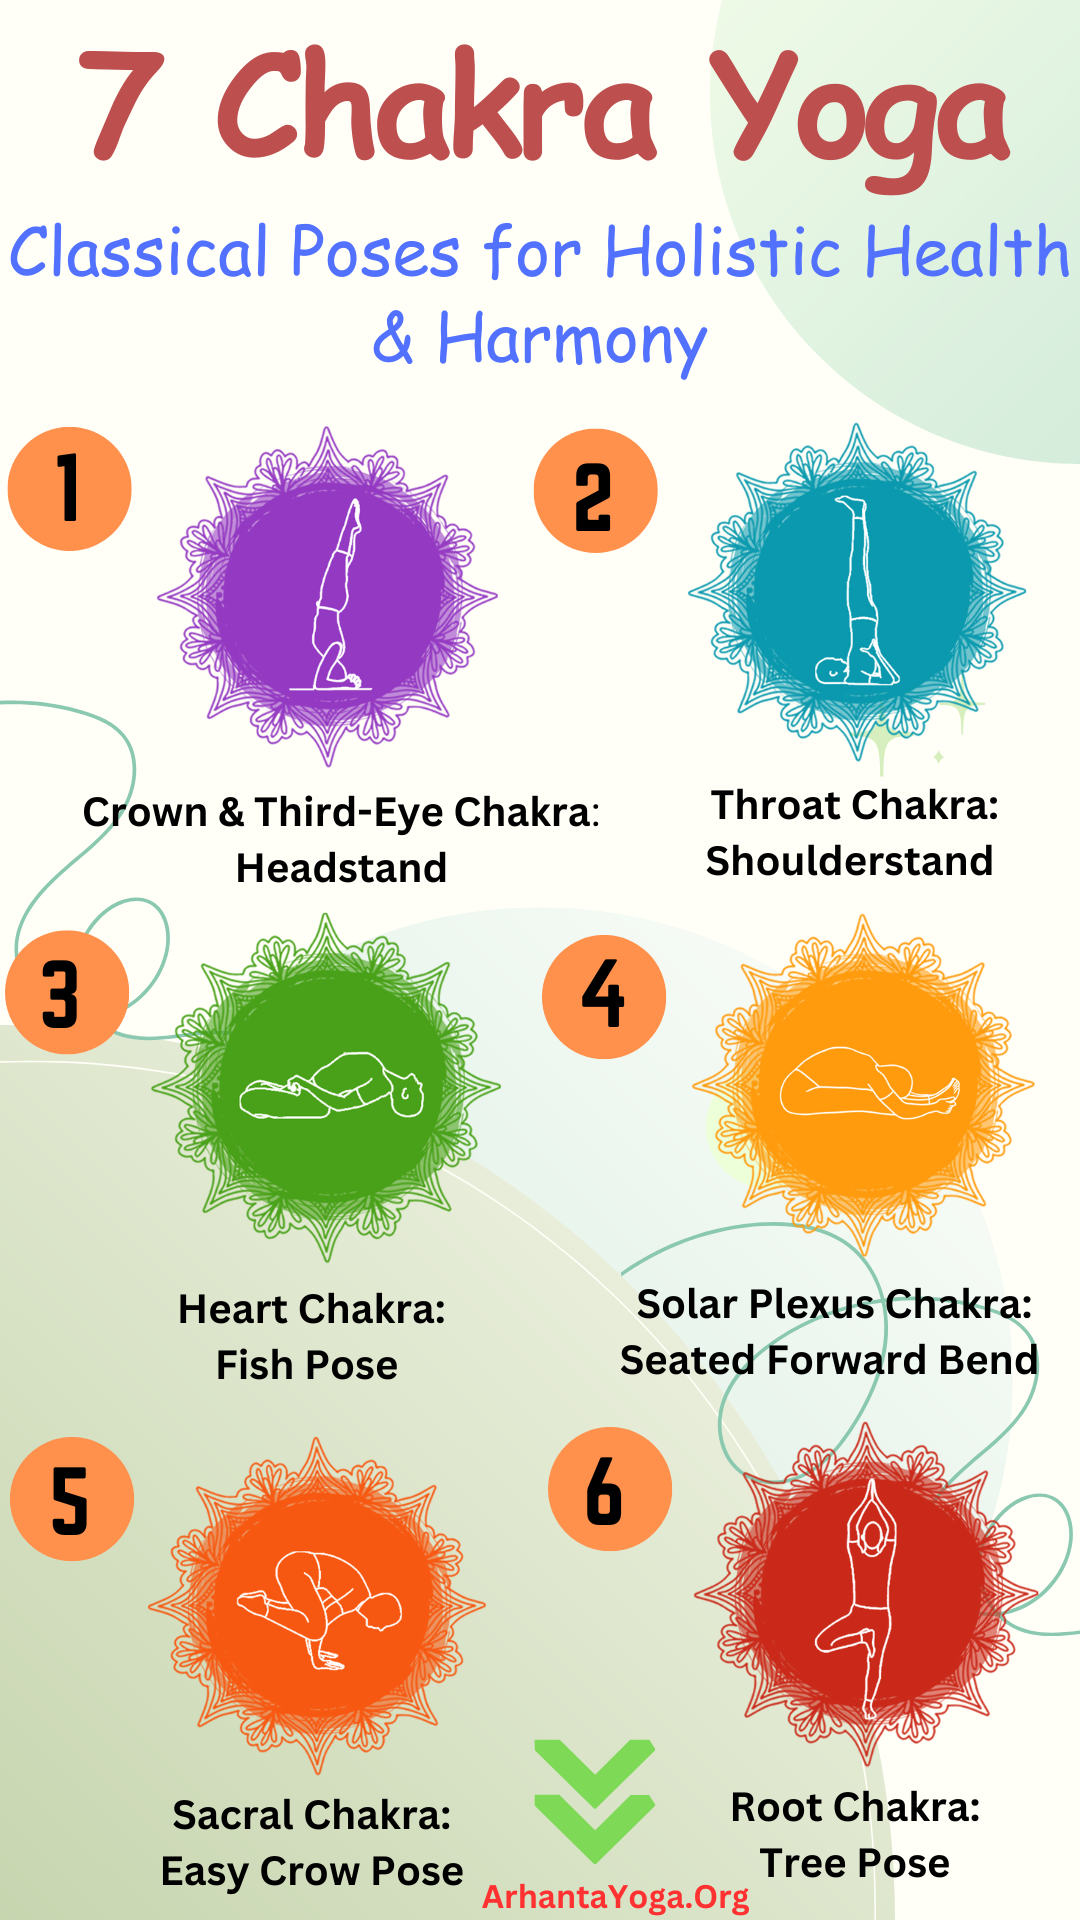 7 Chakra Yoga: Classical Poses for Holistic Health by walkermartin on  DeviantArt